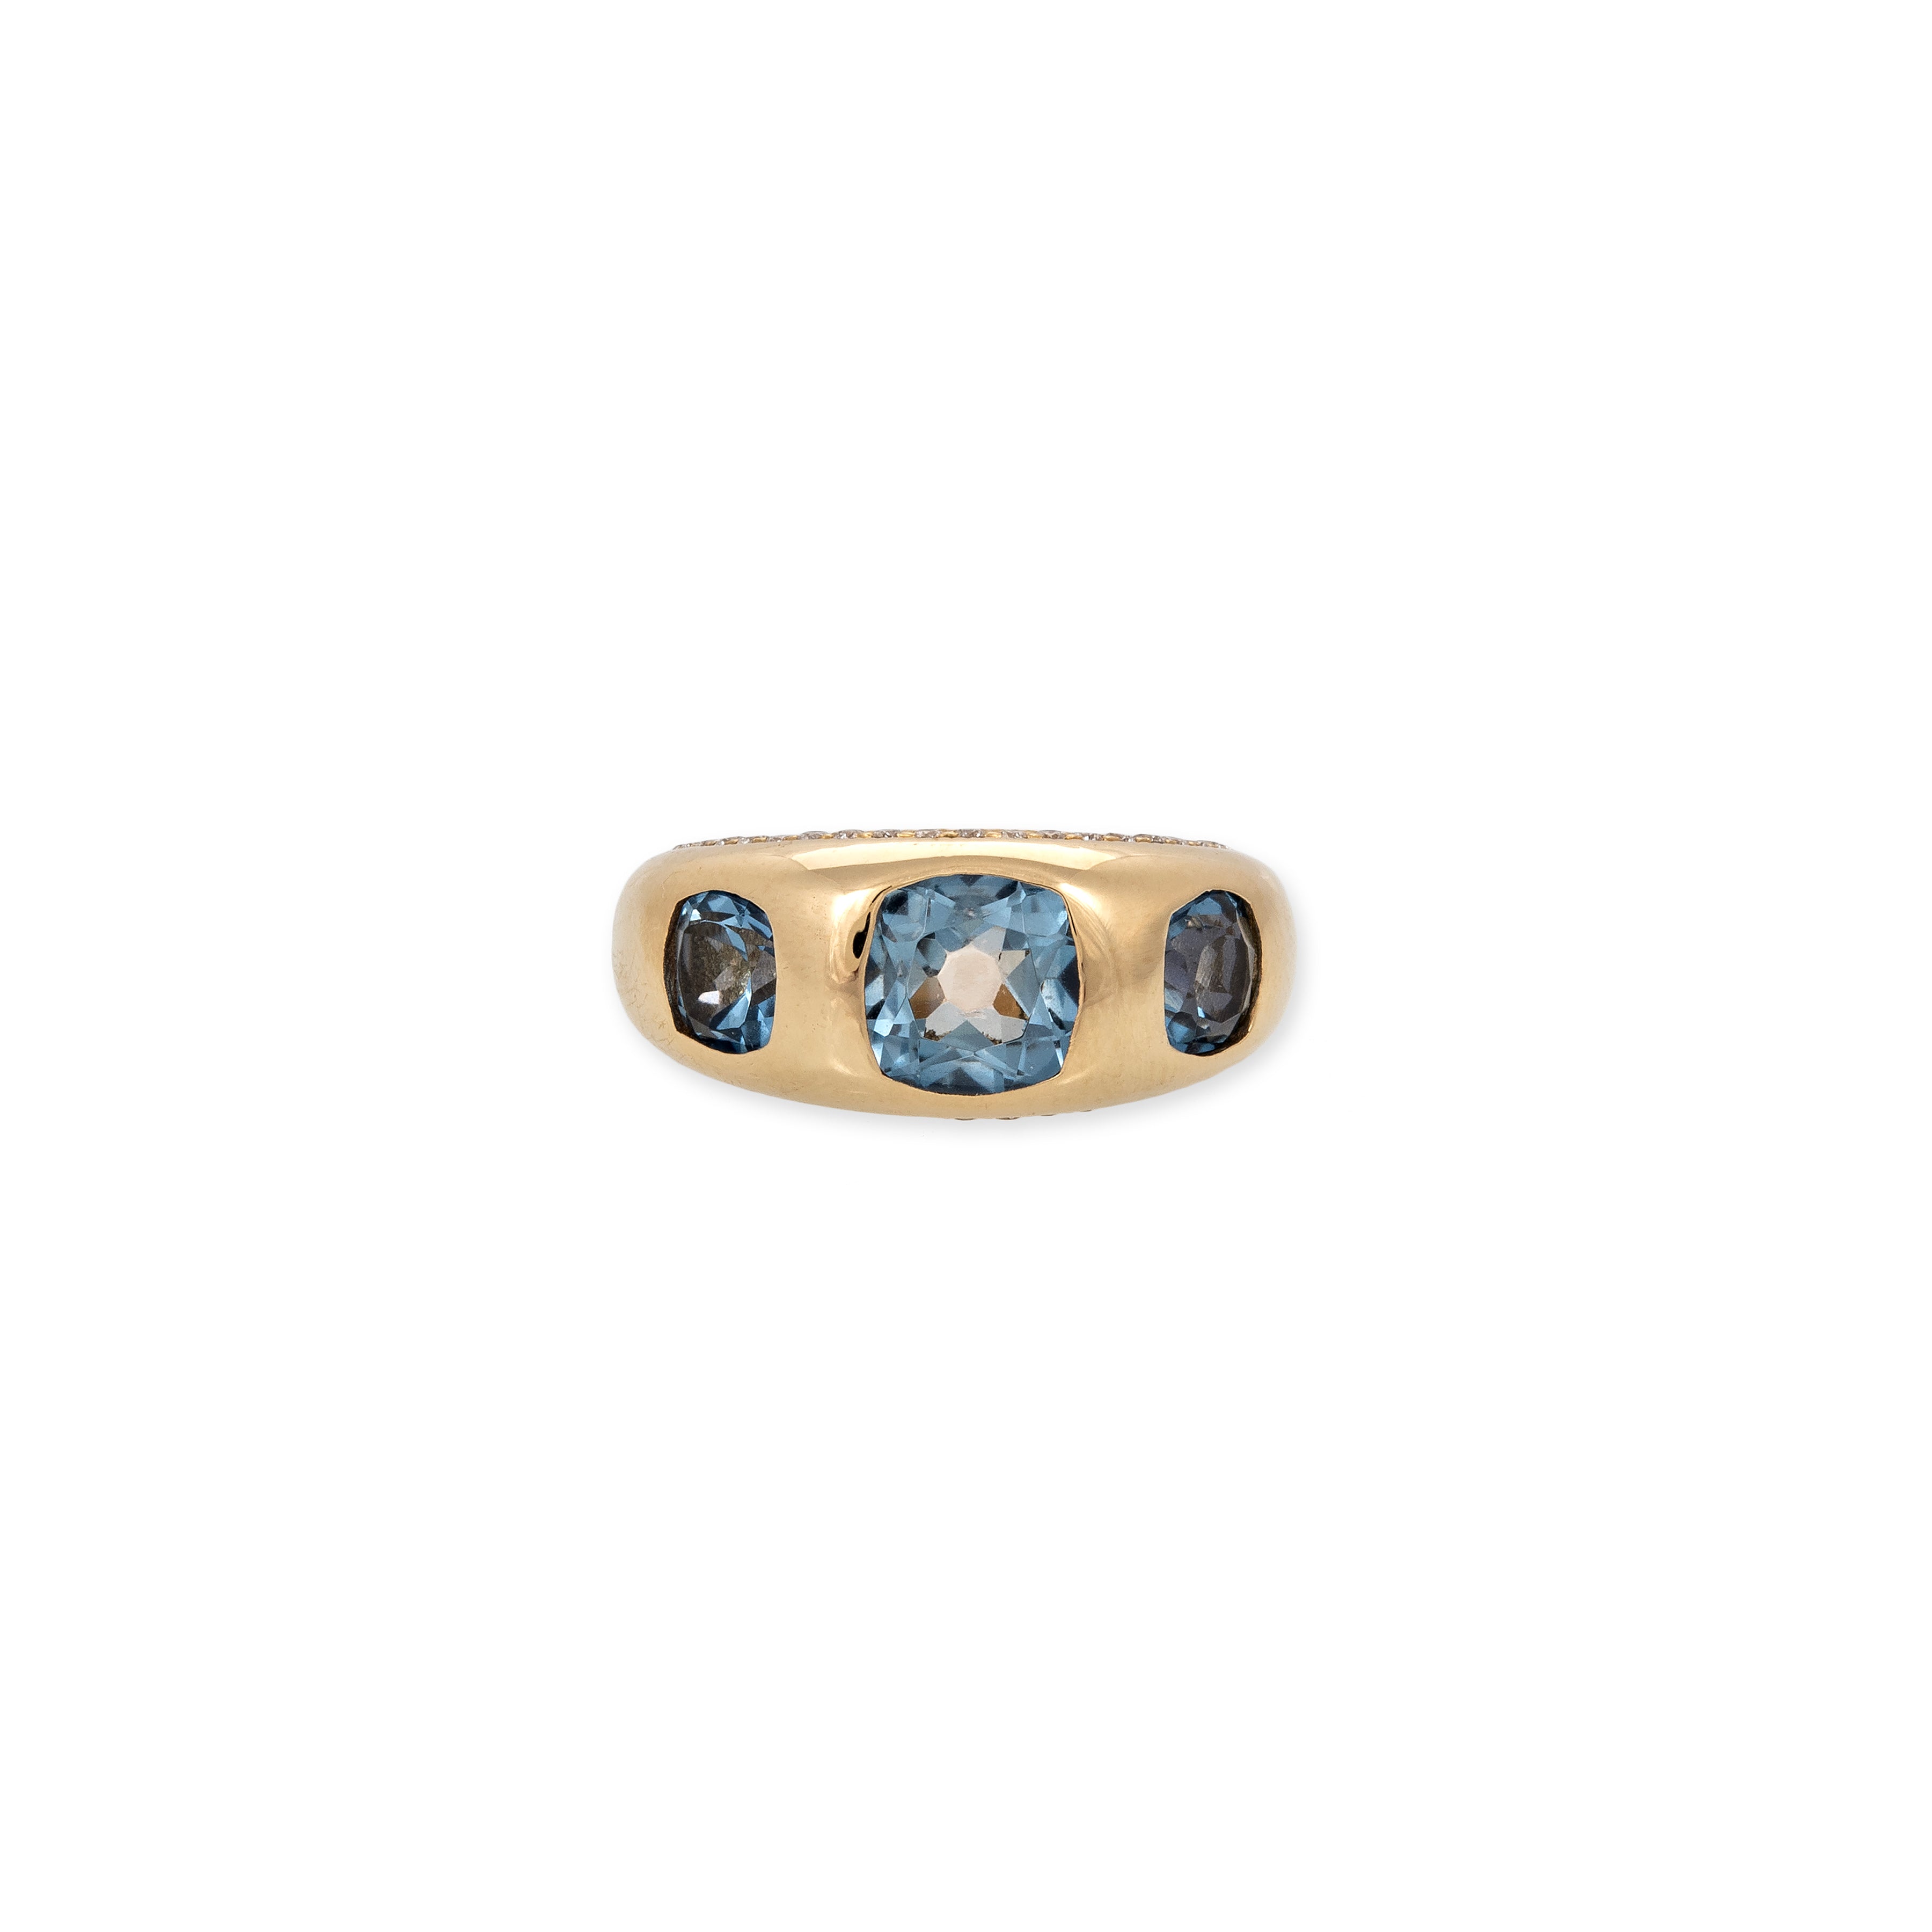 PAVE 3 BLUE COATED TOPAZ RING